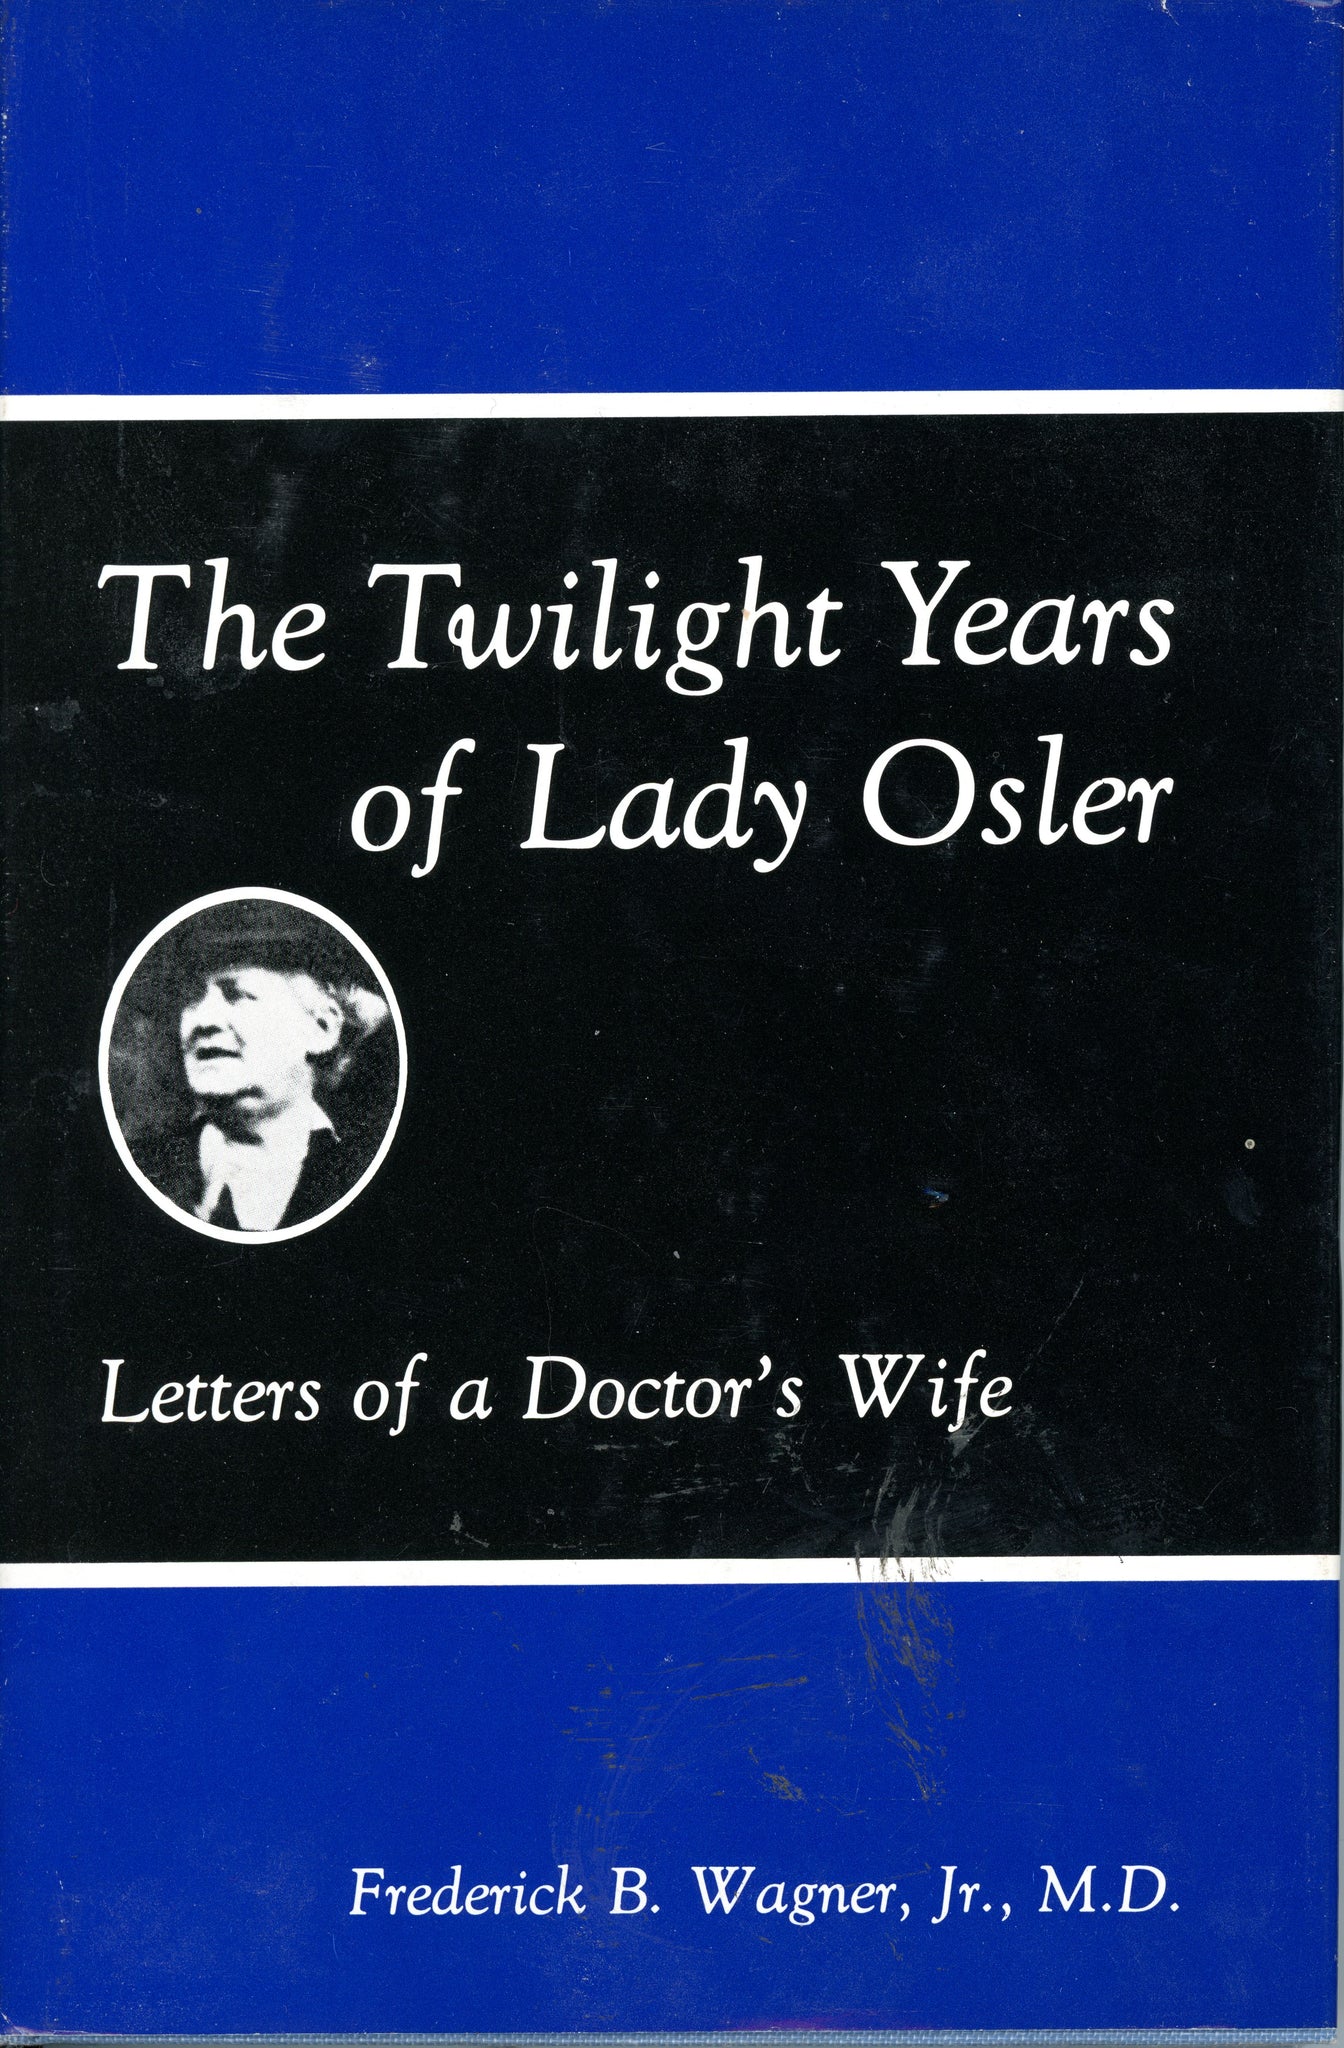 The Twilight Years of Lady Osler: Letters of a Doctor's Wife